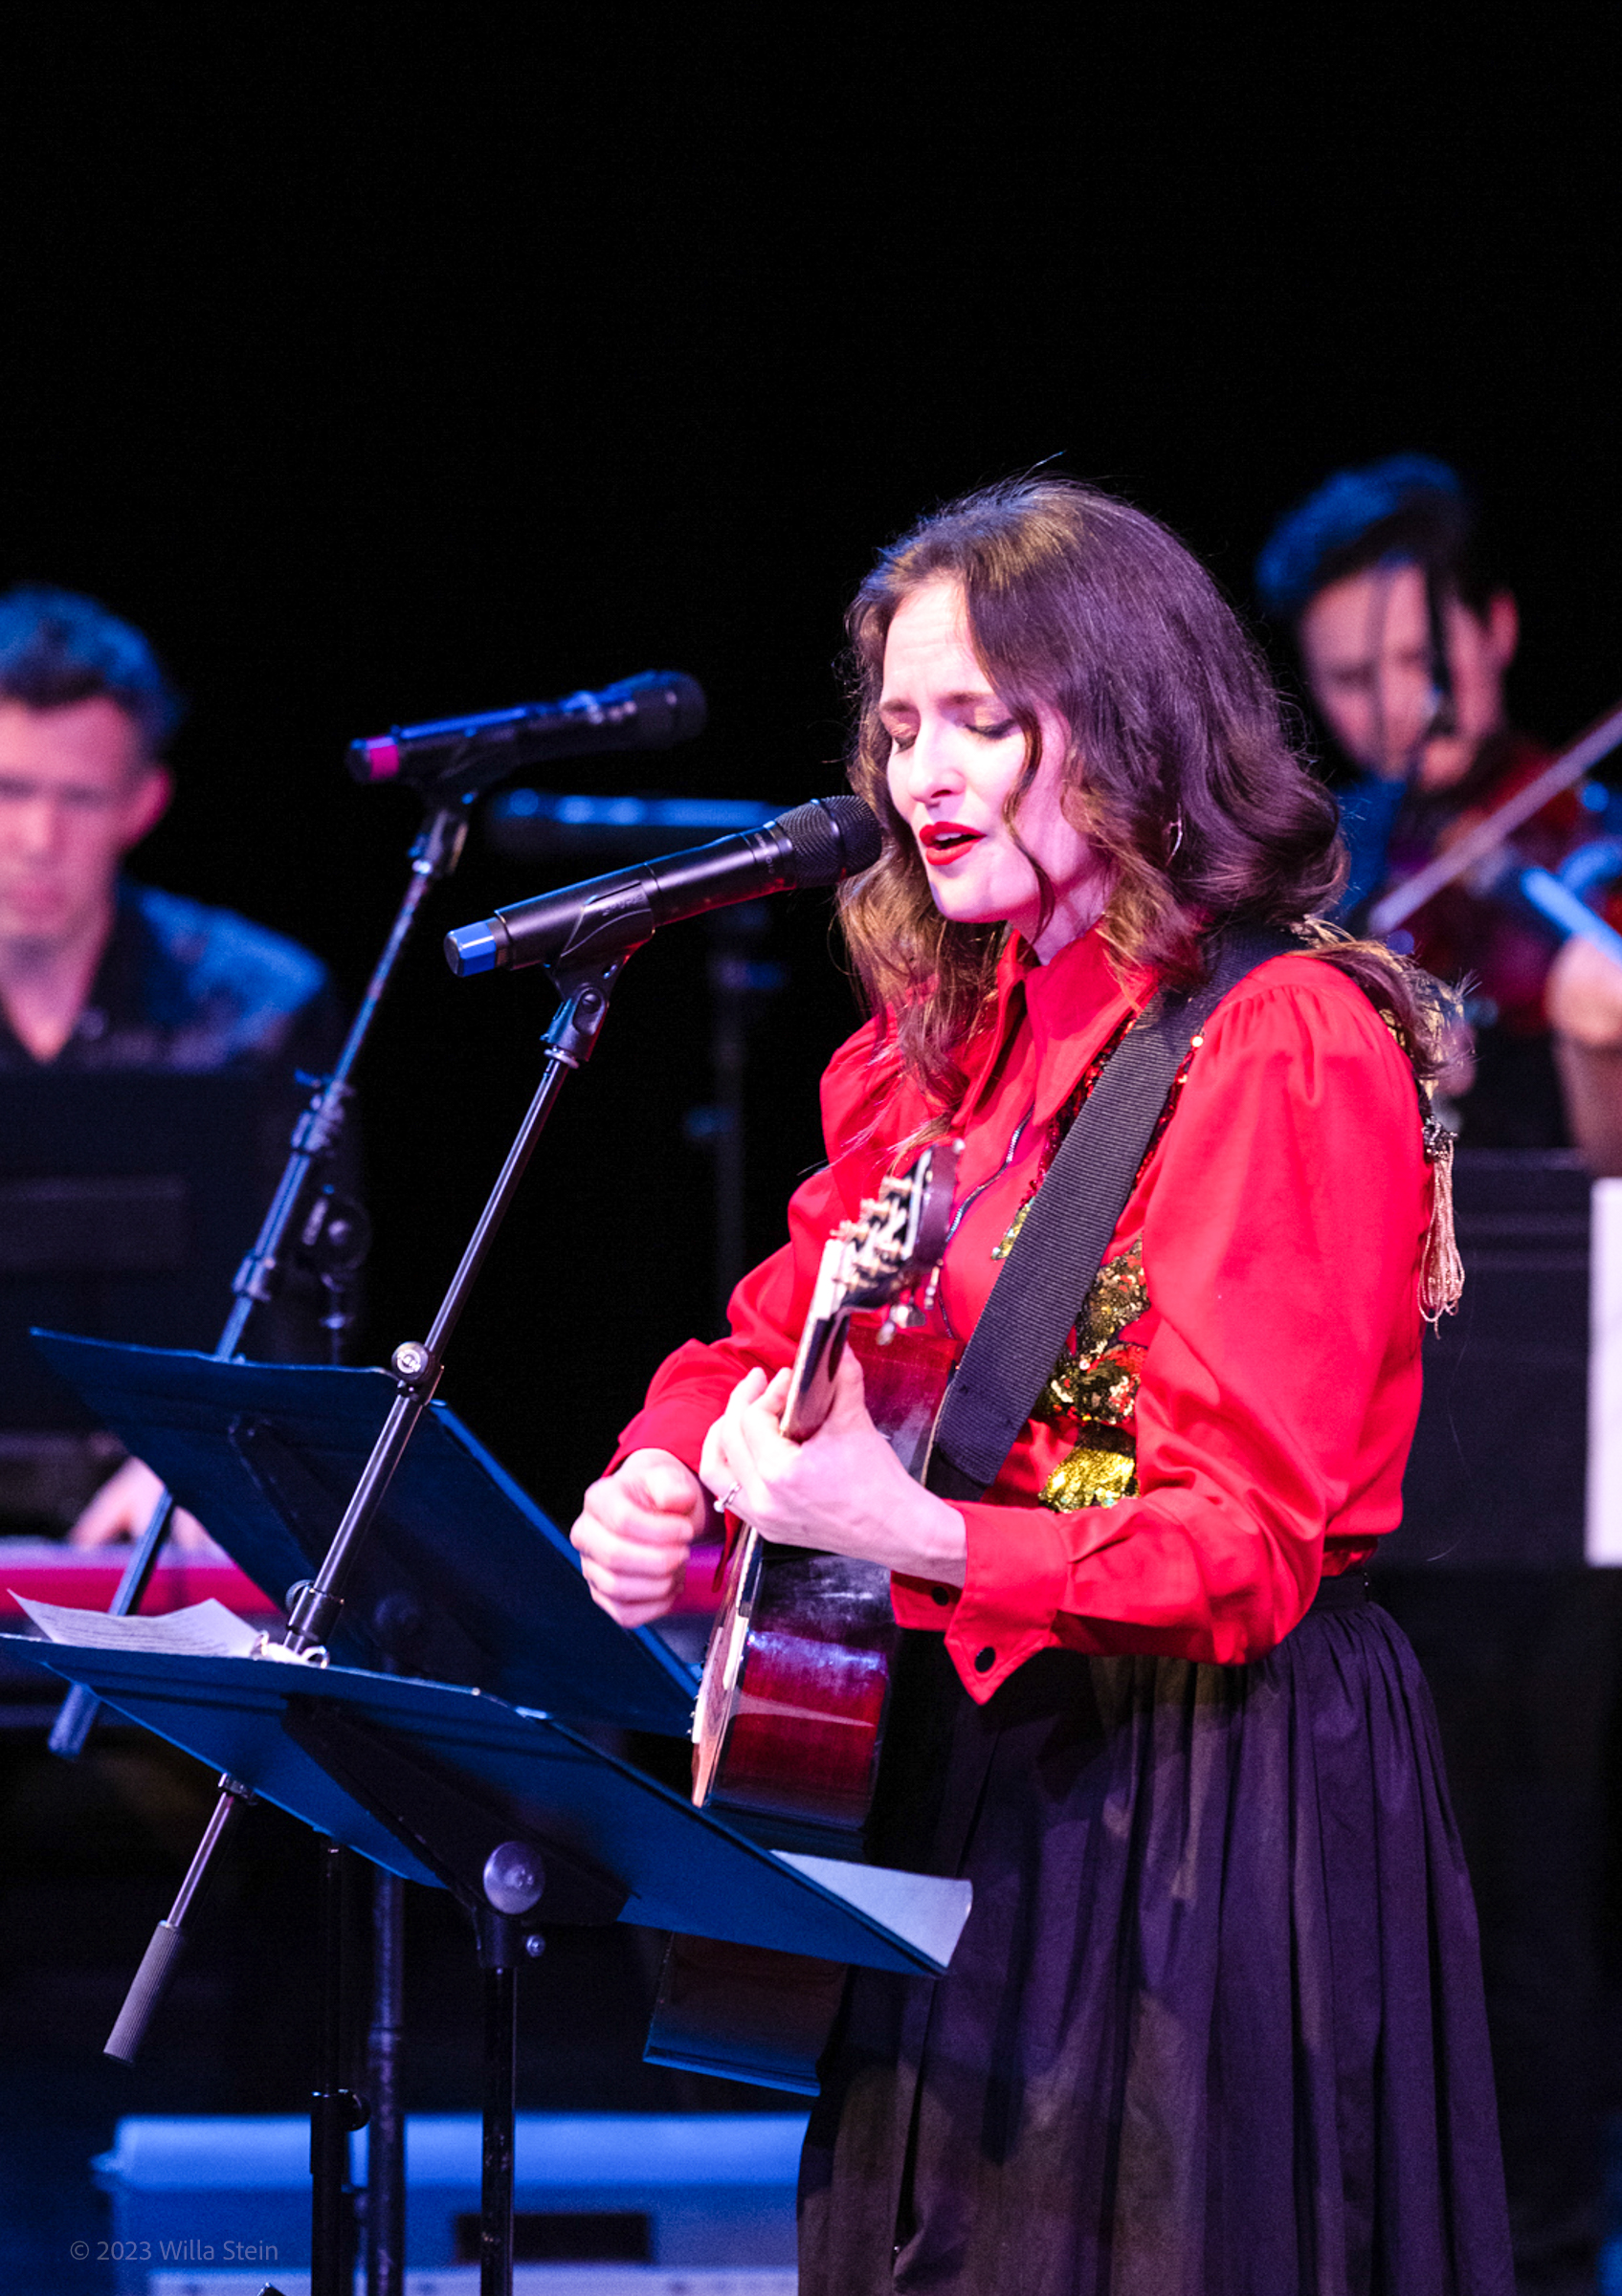 A woman in a red blouse behind a microphone singing and playing guitar live.